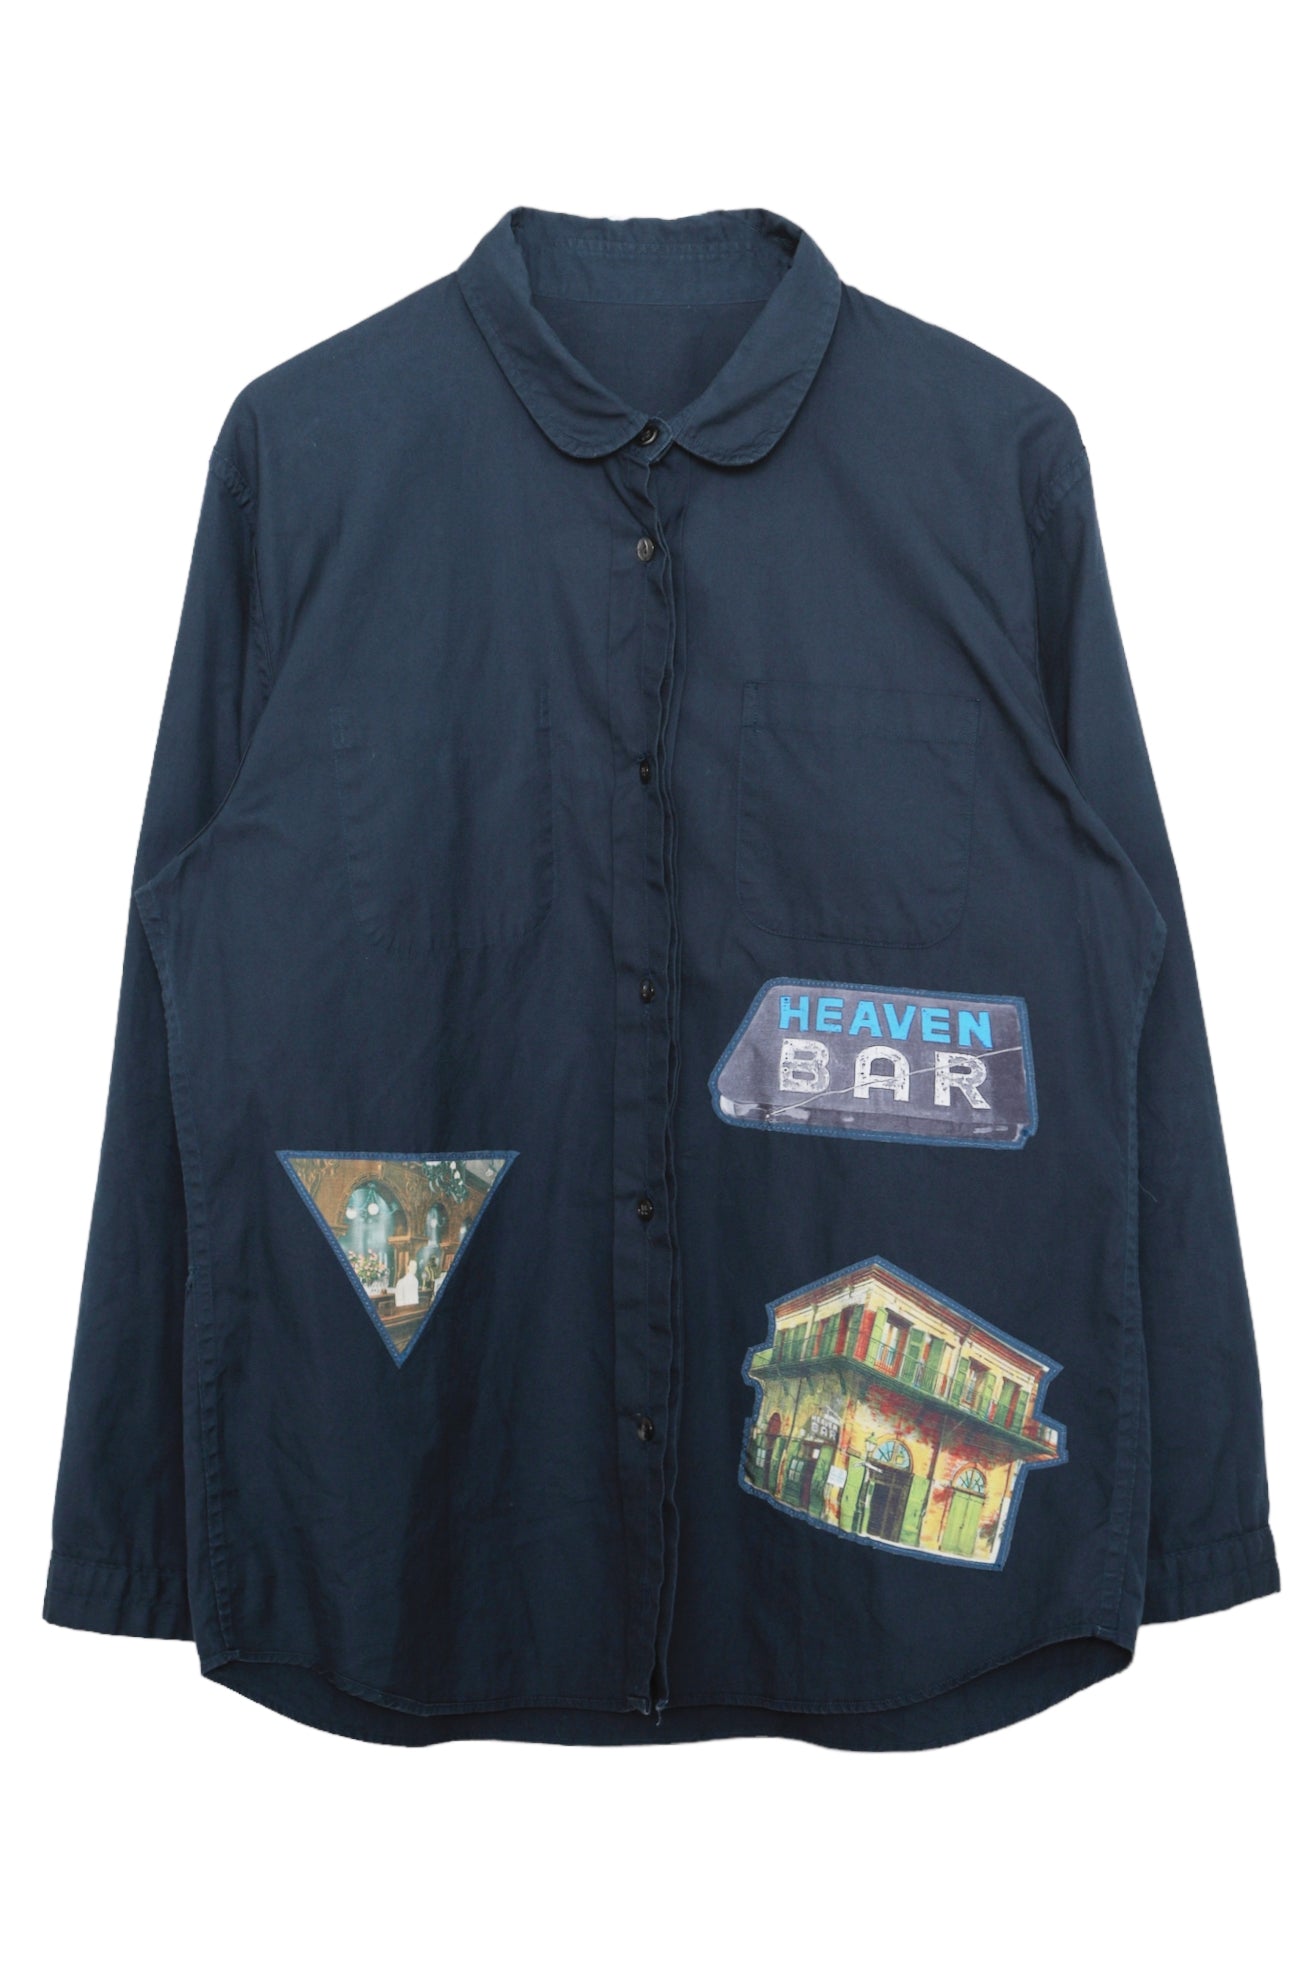 UNDERCOVER REVERSIBLE PATCHWORK SHIRT